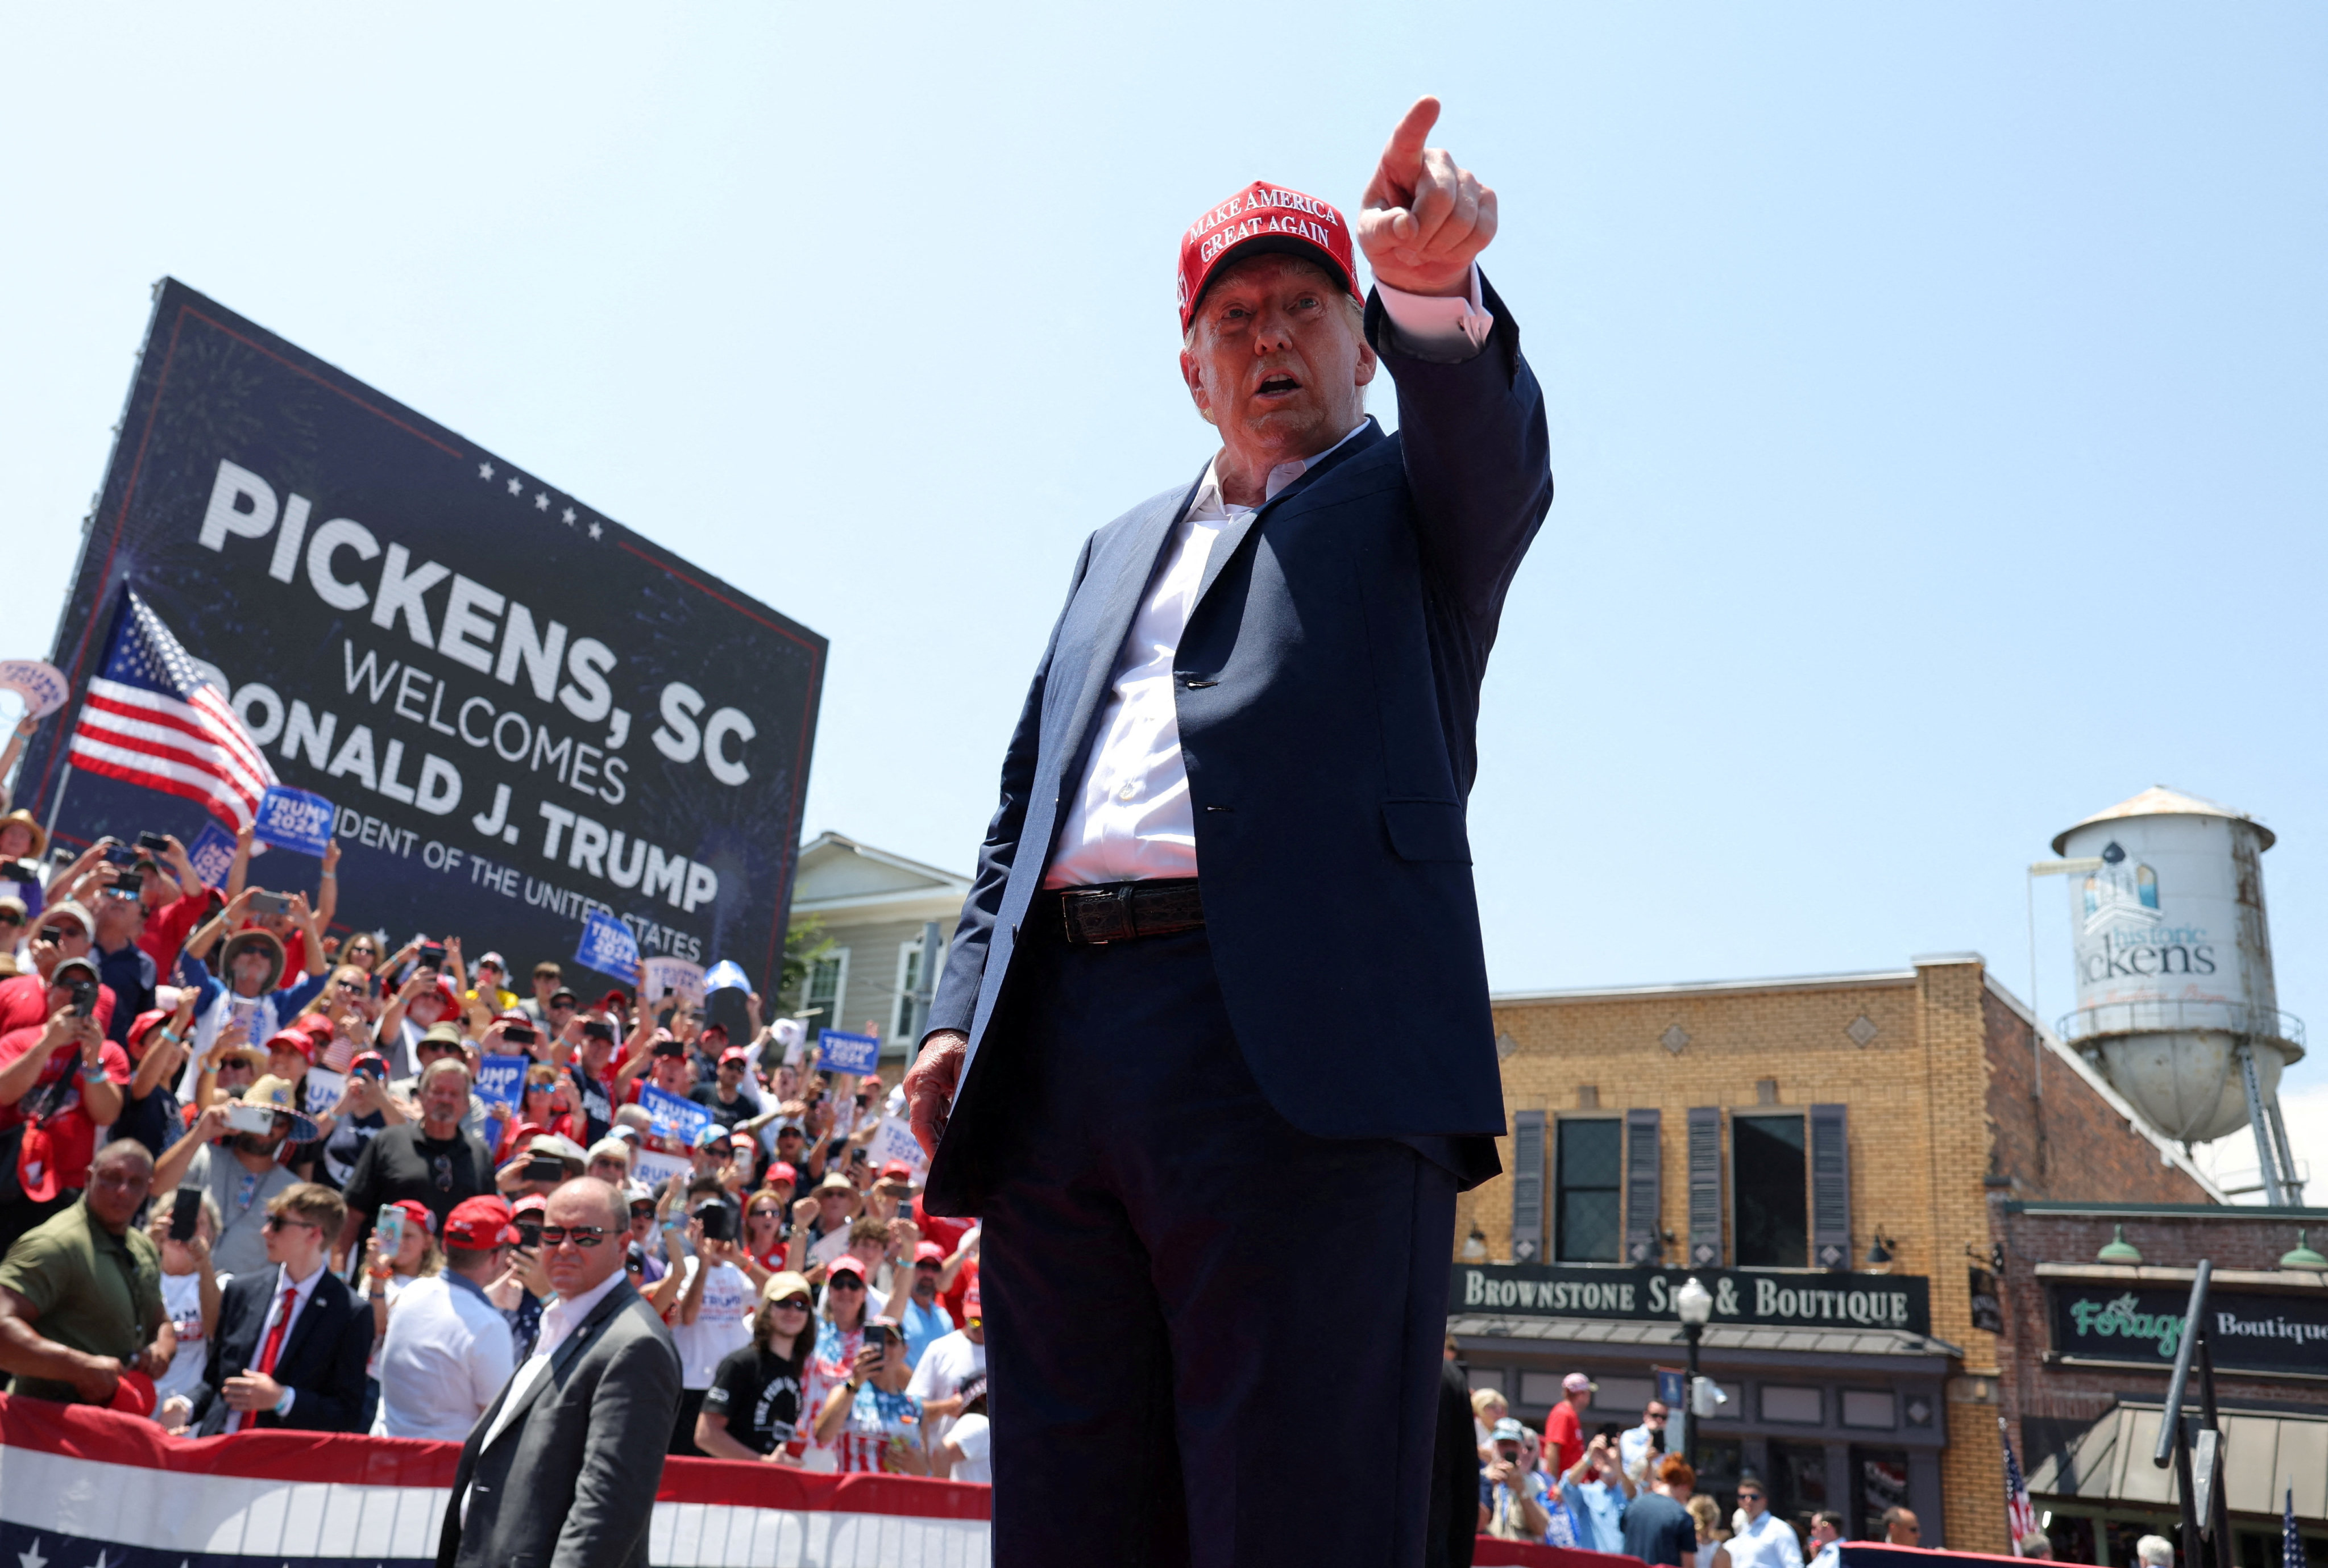 Former US president Donald Trump gestures at a rally in Pickens, South Carolina, on July 1. Photo: Reuters